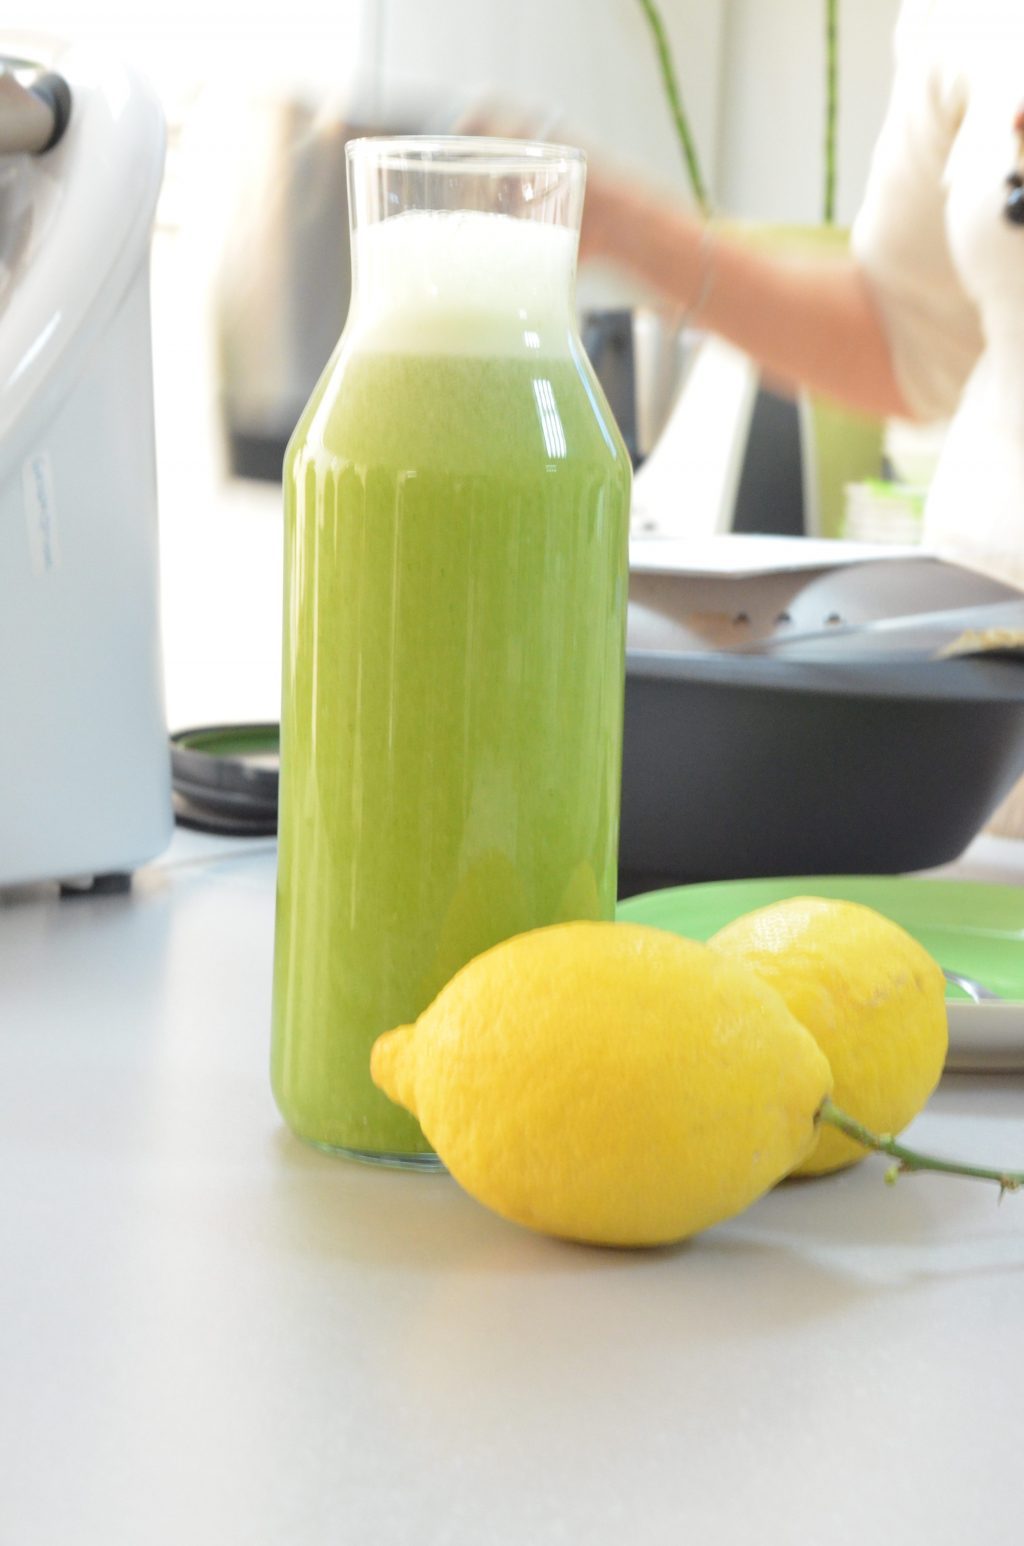 Mint lemonade|Thermomix Middle East